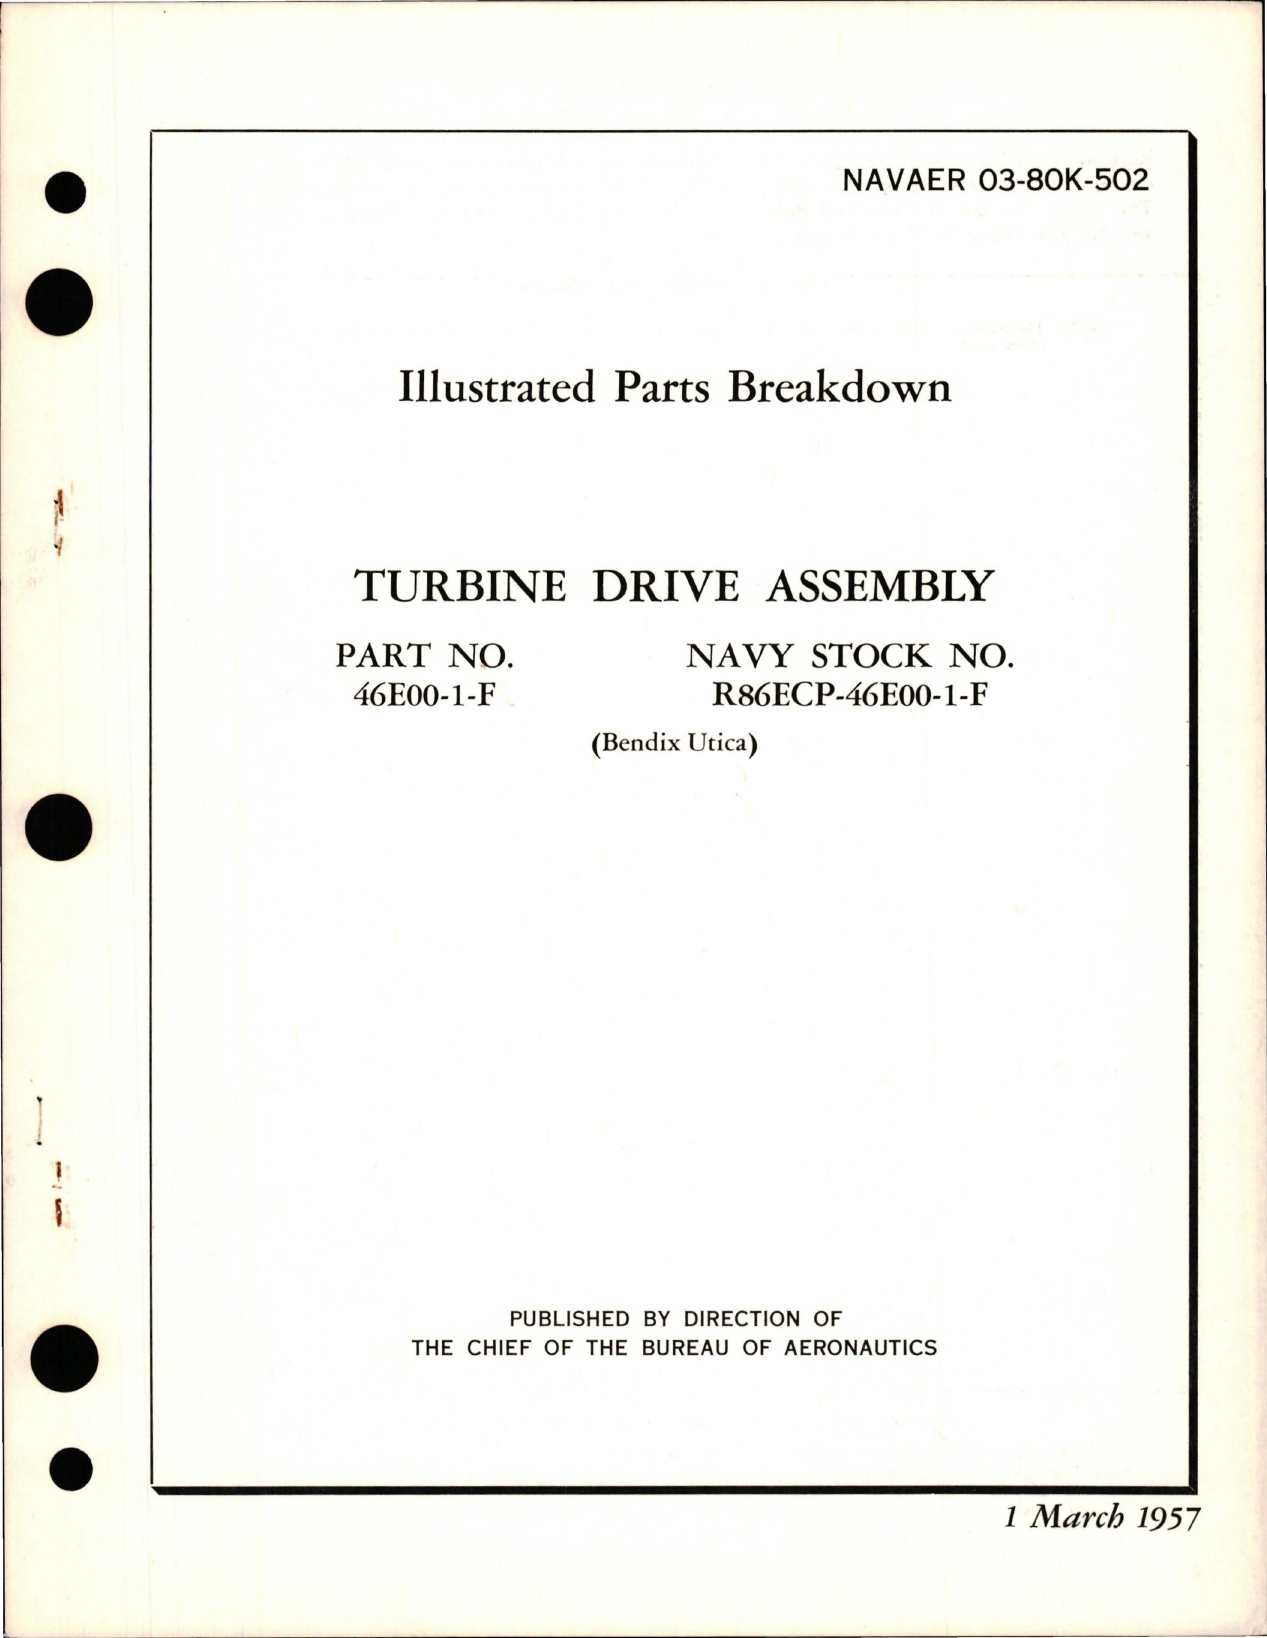 Sample page 1 from AirCorps Library document: Illustrated Parts Breakdown for Turbine Drive Assembly - Part 46E00-1-F 